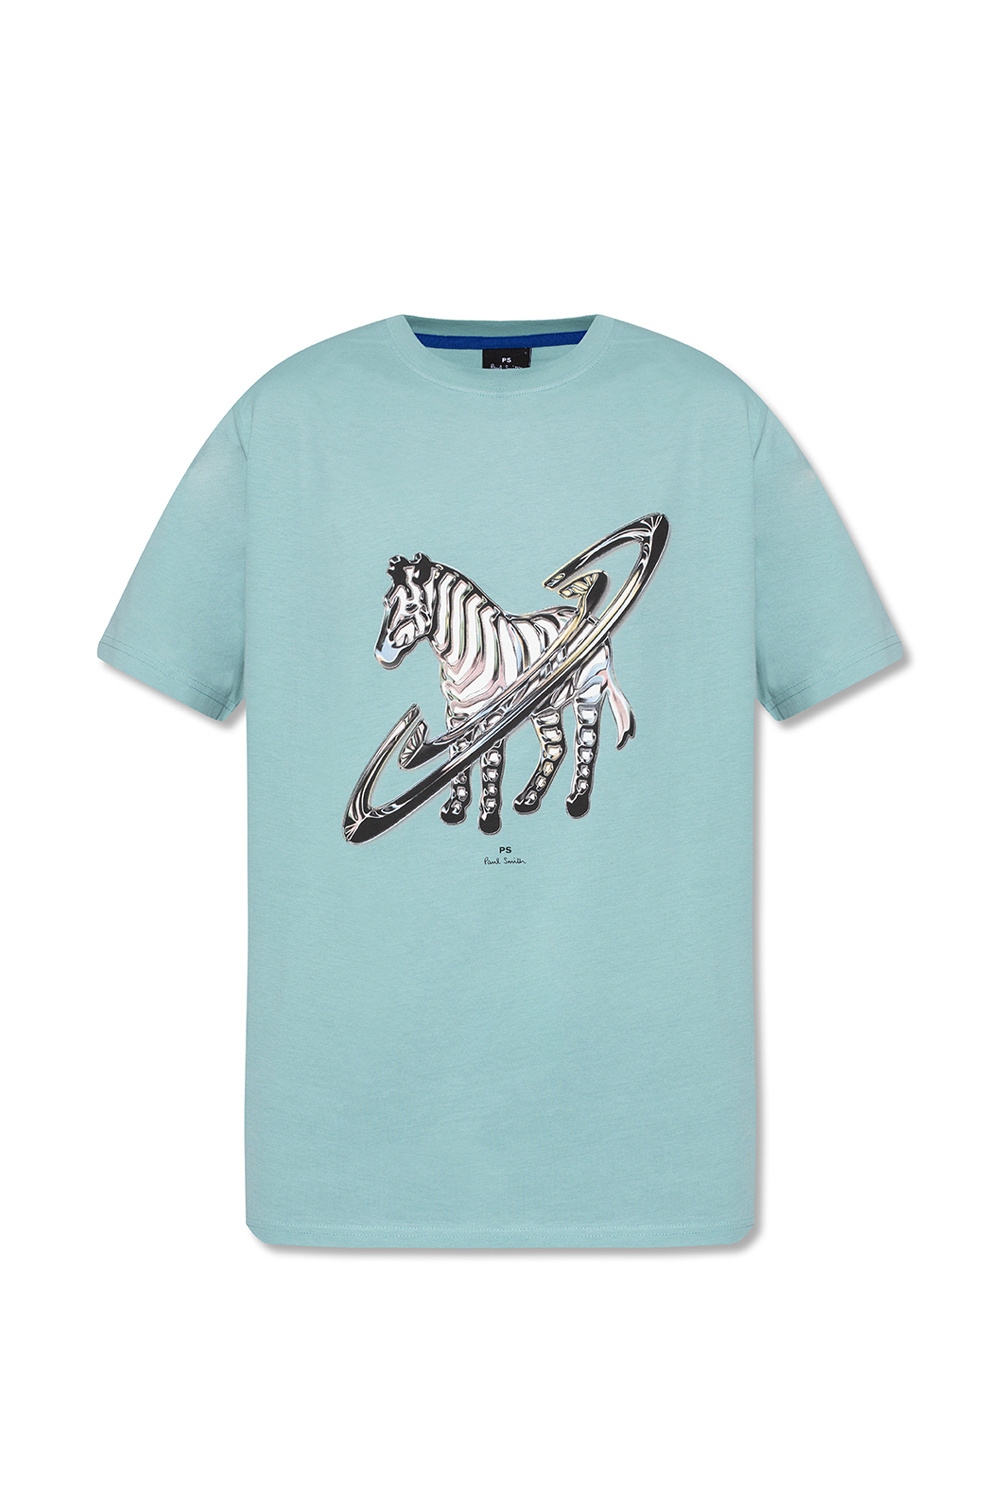 PS Paul Smith wooyoungmi oversized logo print t repel shirt item